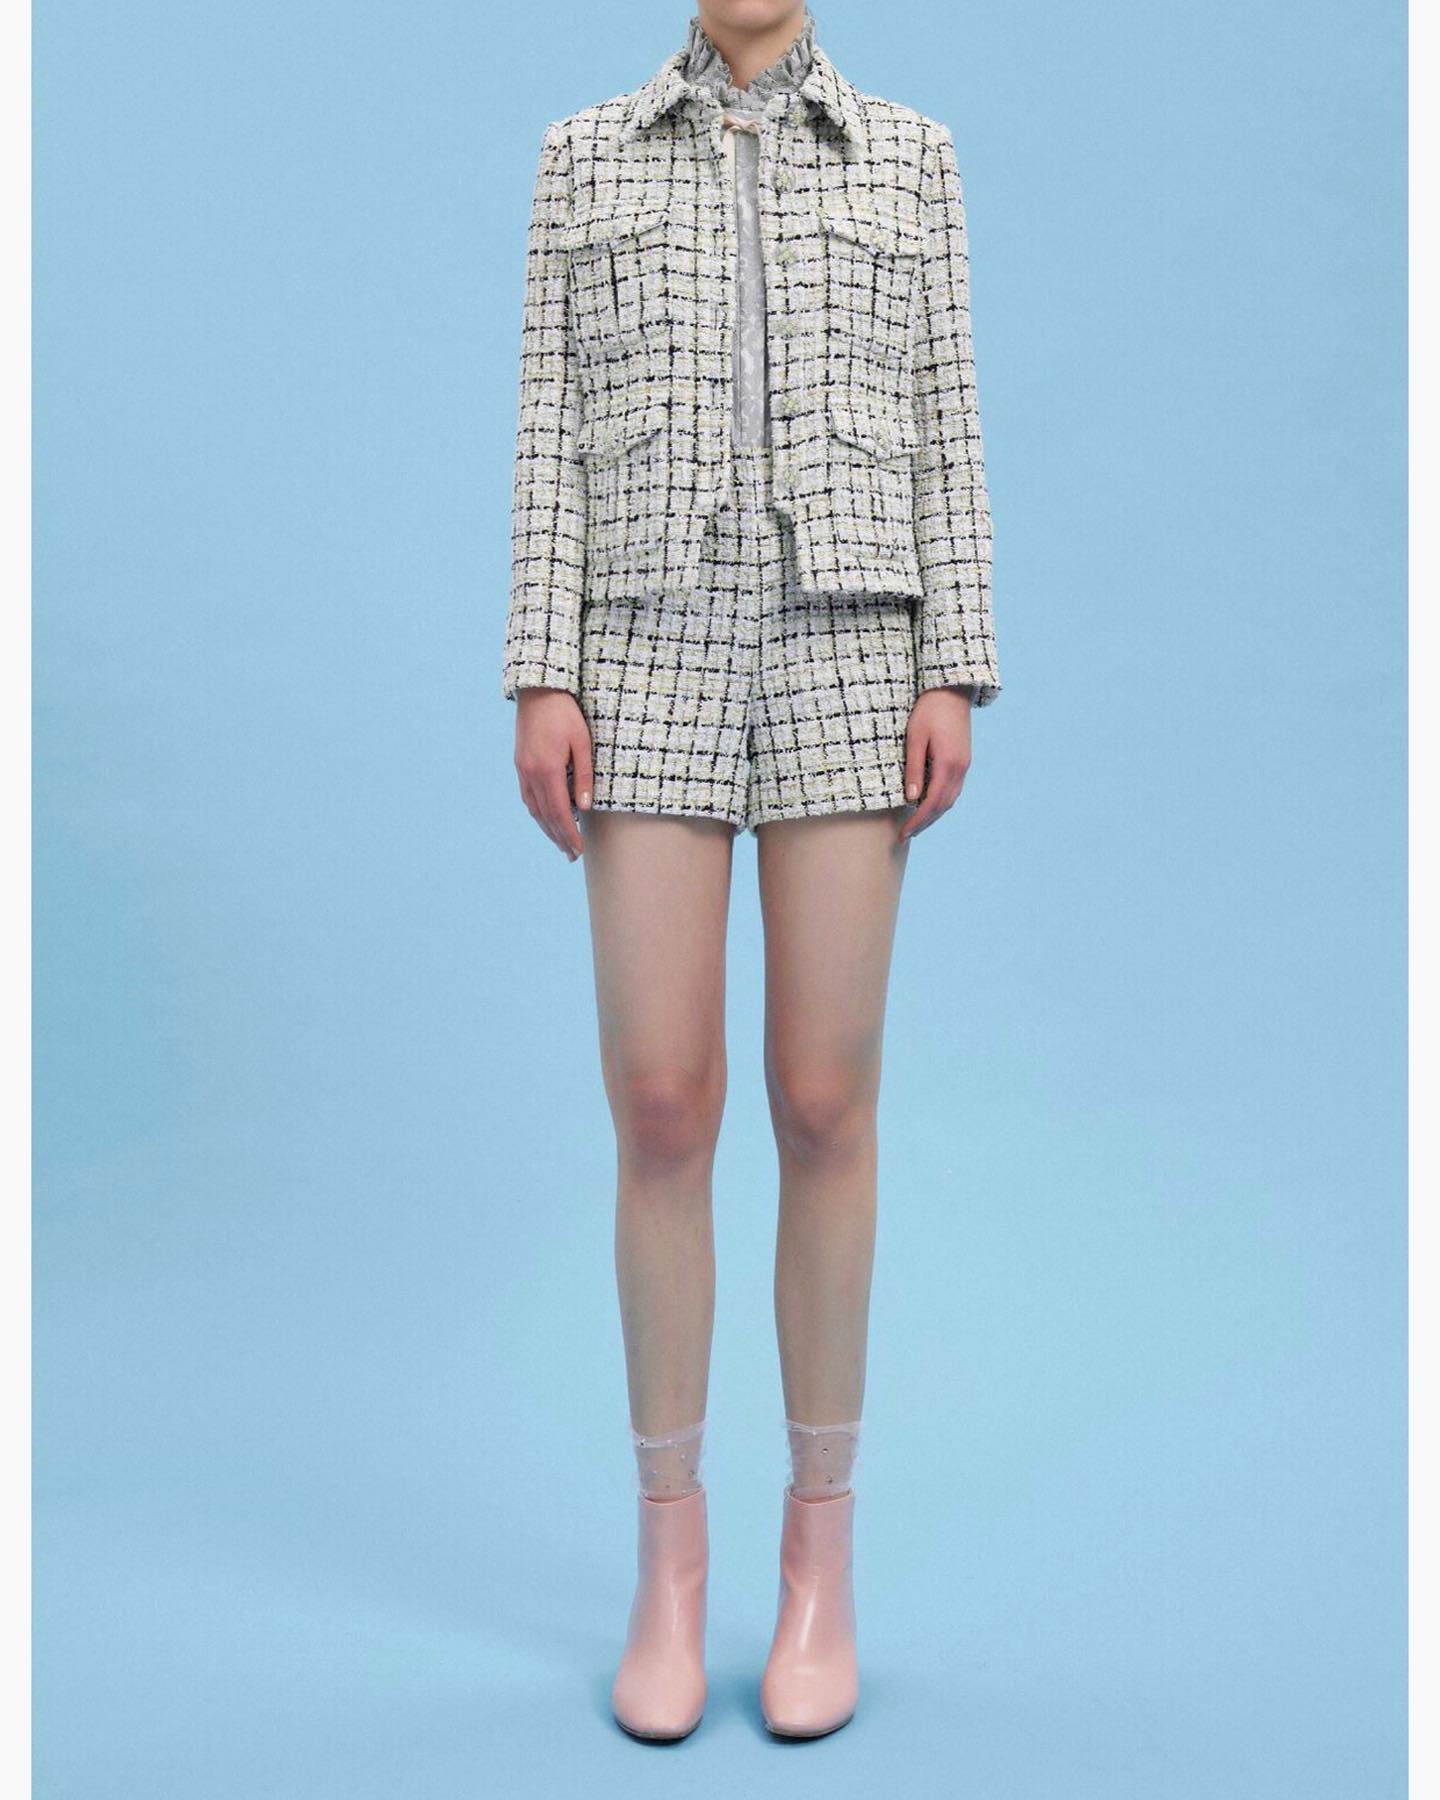 #MOISELLEUniqueness The grass grows greener during Spring time.  Get this refreshing green tweed suit to complete your fresh Spring wardrobe. ... From dreamy dresses to must-have tweed jackets, we've got you covered for Spring 2021 at moiselle.com.hk Deputy CEO and Creative Director Harris Chan @_harris_chan_